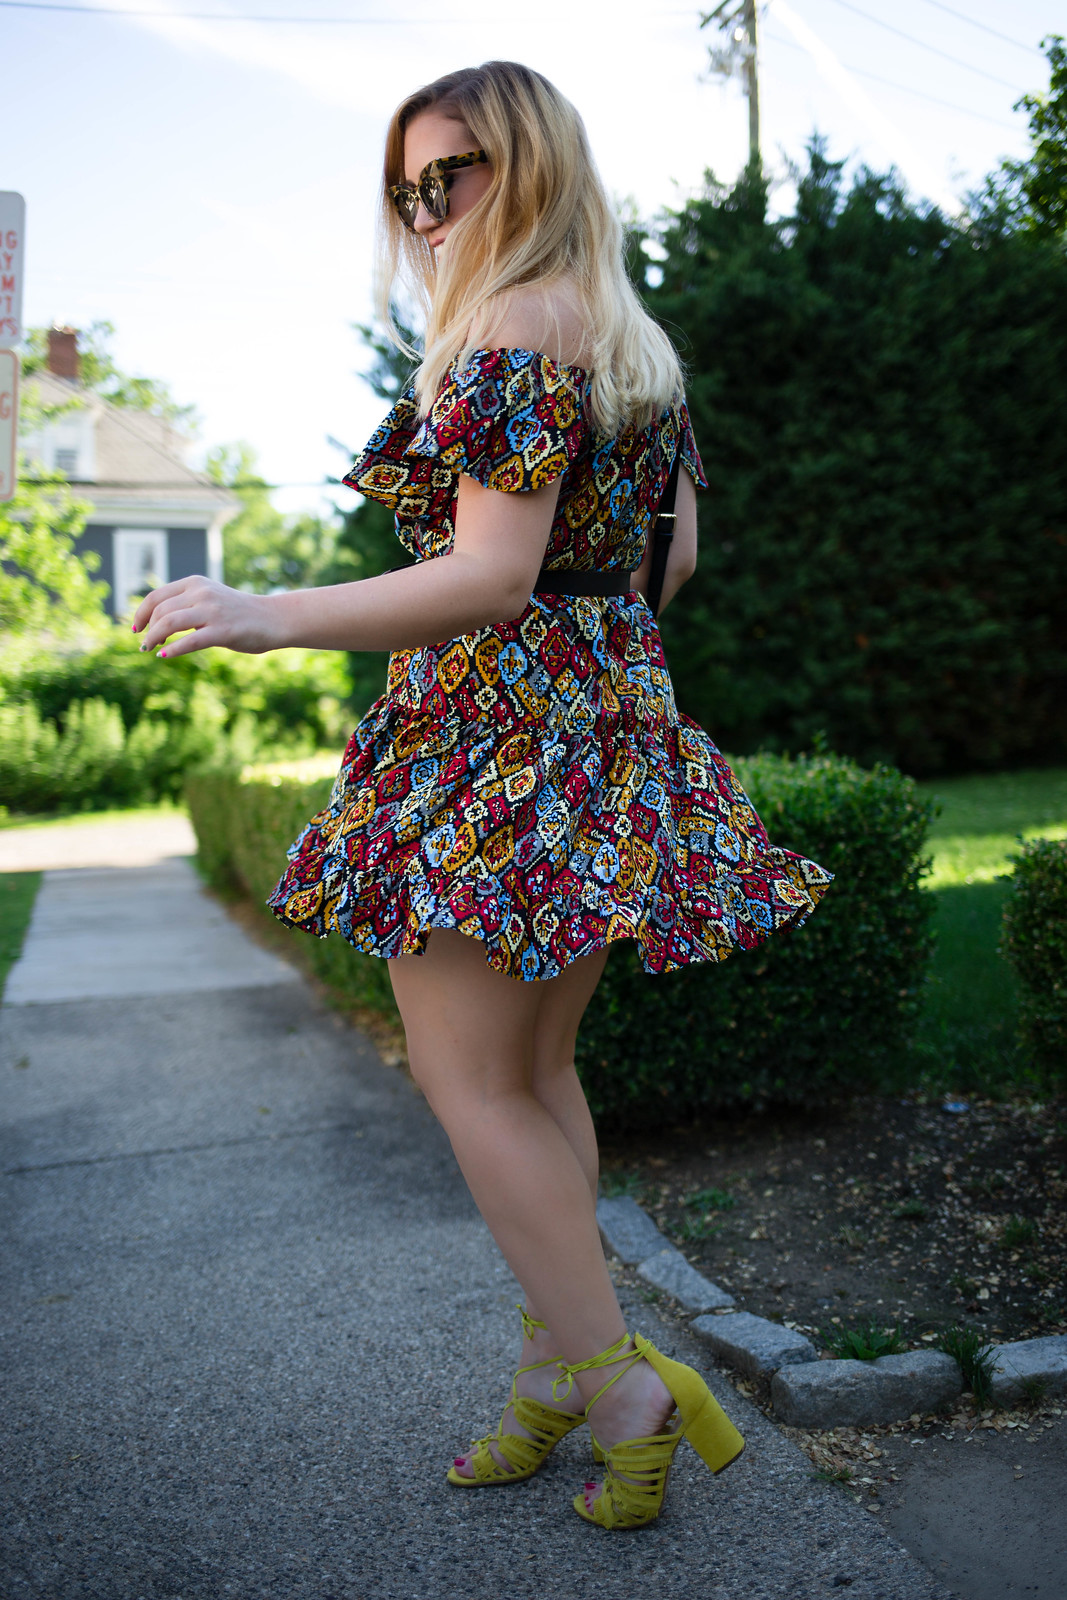 Why Printed Dresses are Better than Solids | Colorful Dress Twirling Pose Hastings on Hudson New York